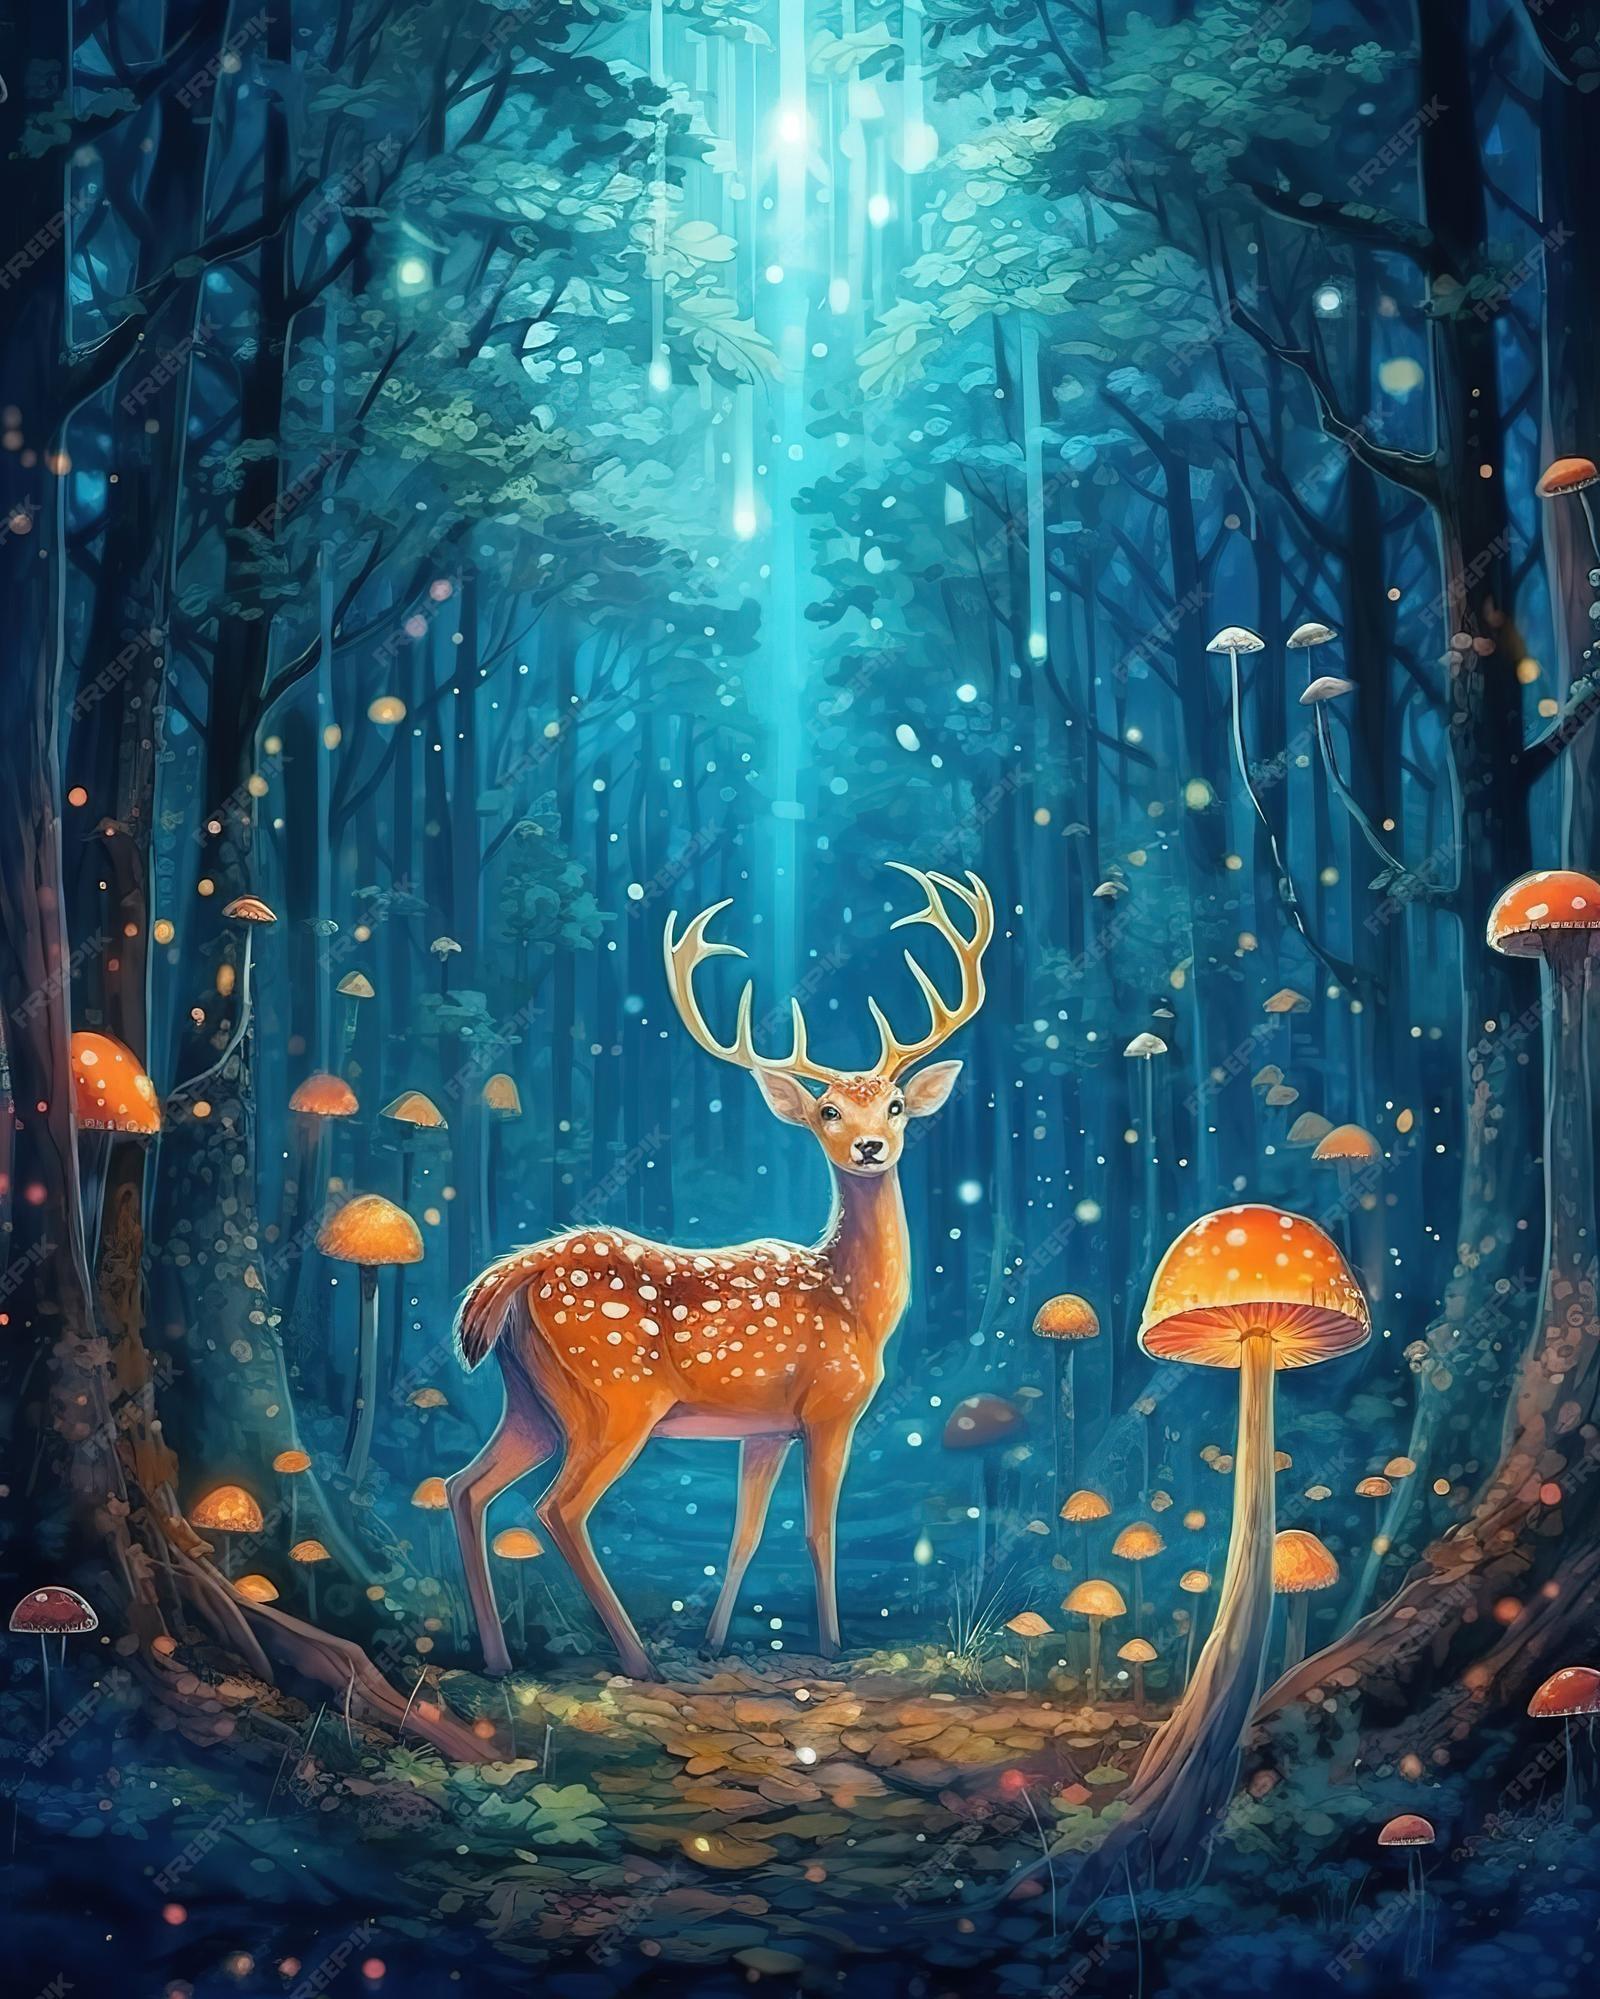 Premium Photo A Deer In Forest With Mushrooms